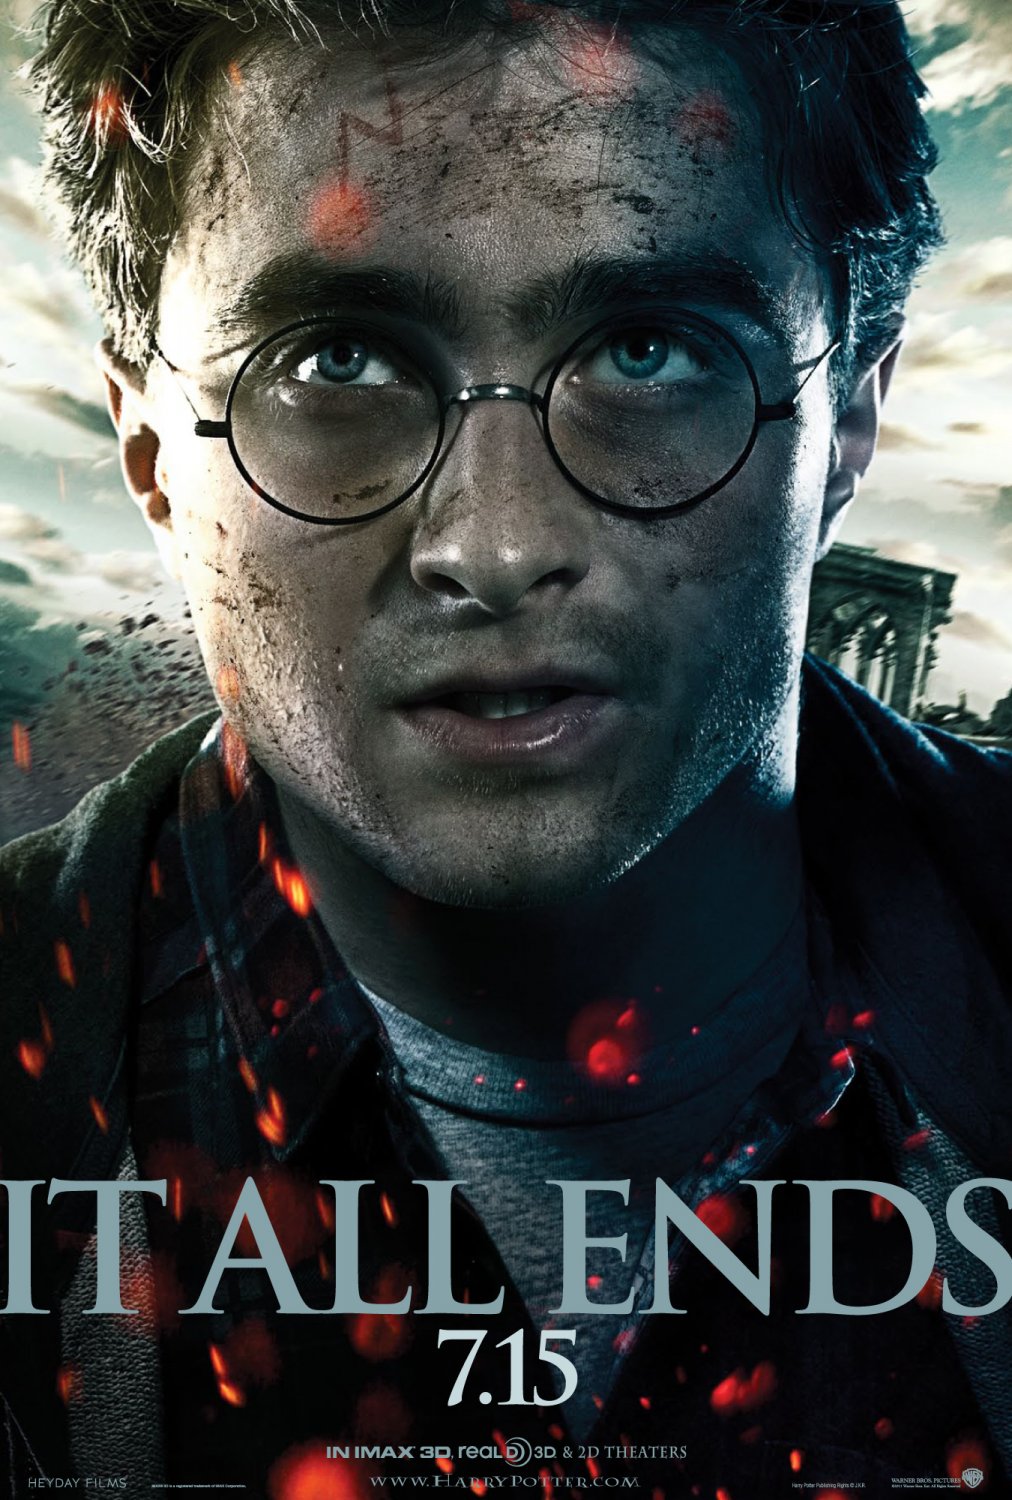 download harry potter and the deathly hallows part 2 movie